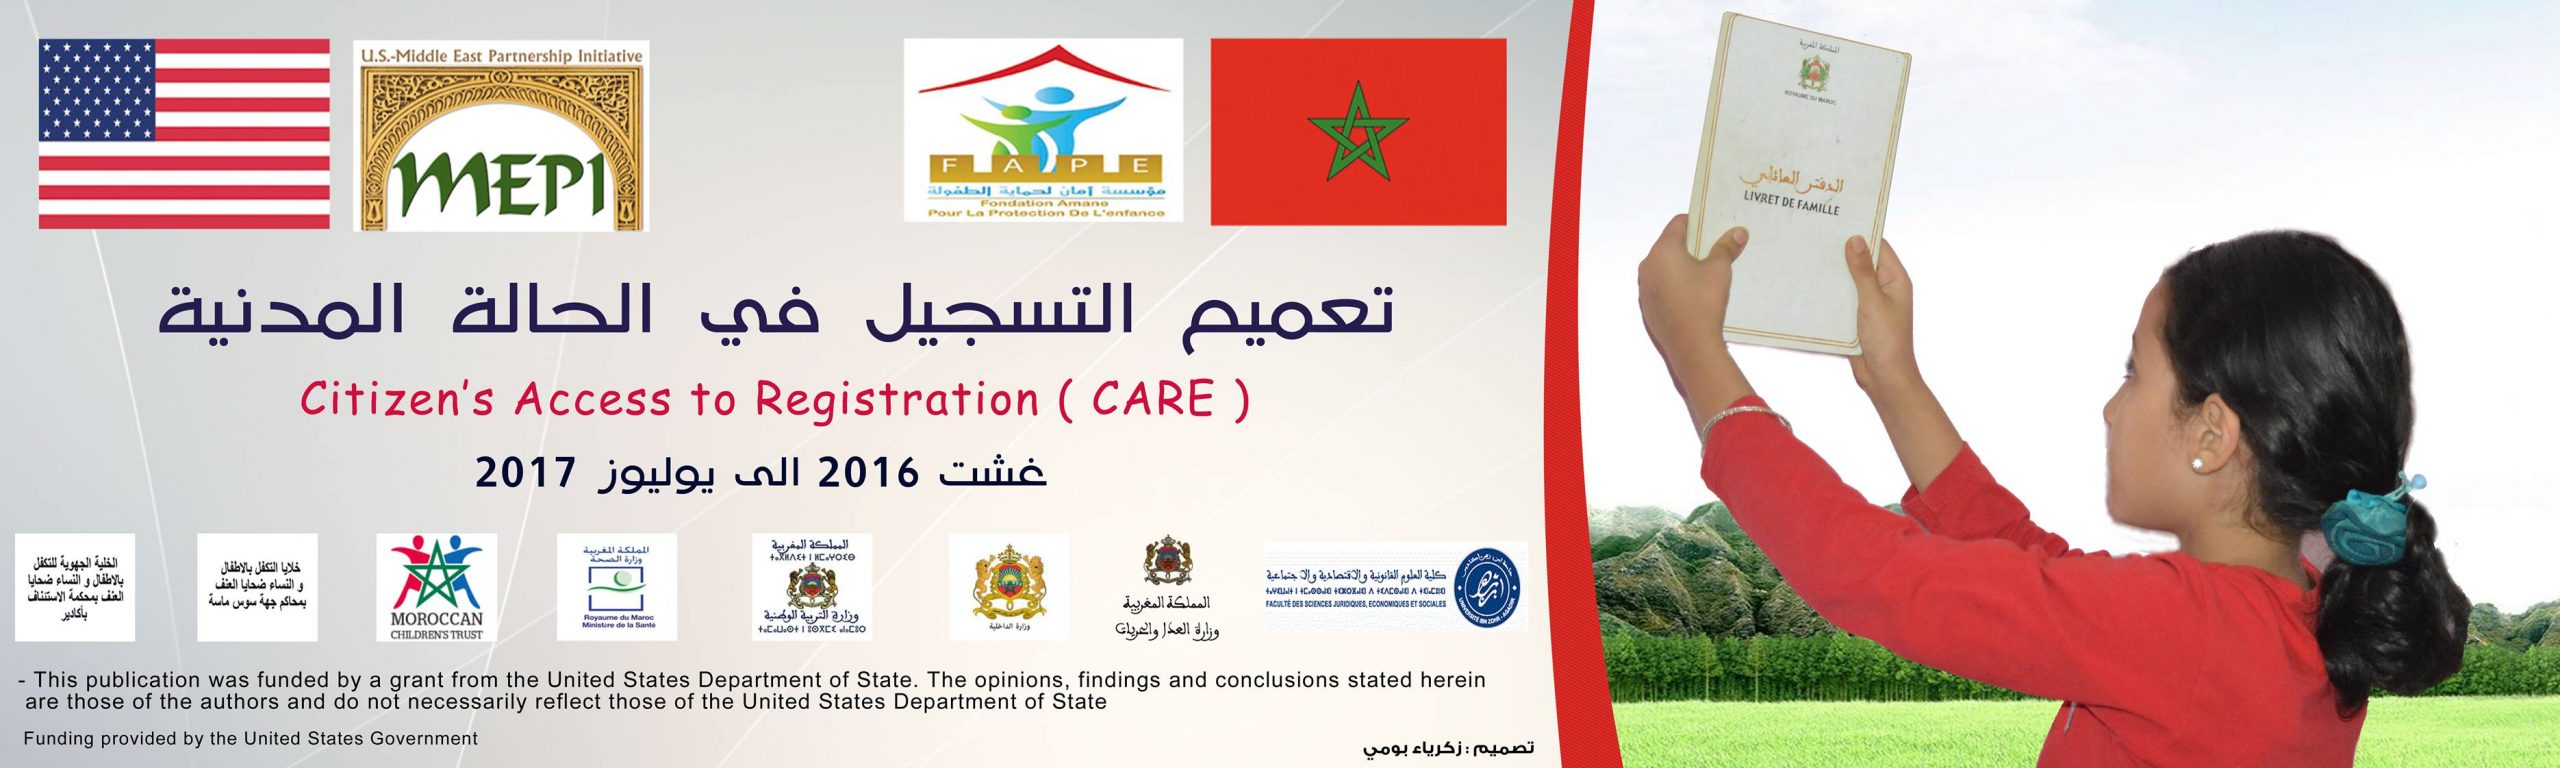 Project Care: Citizens Access To Registration